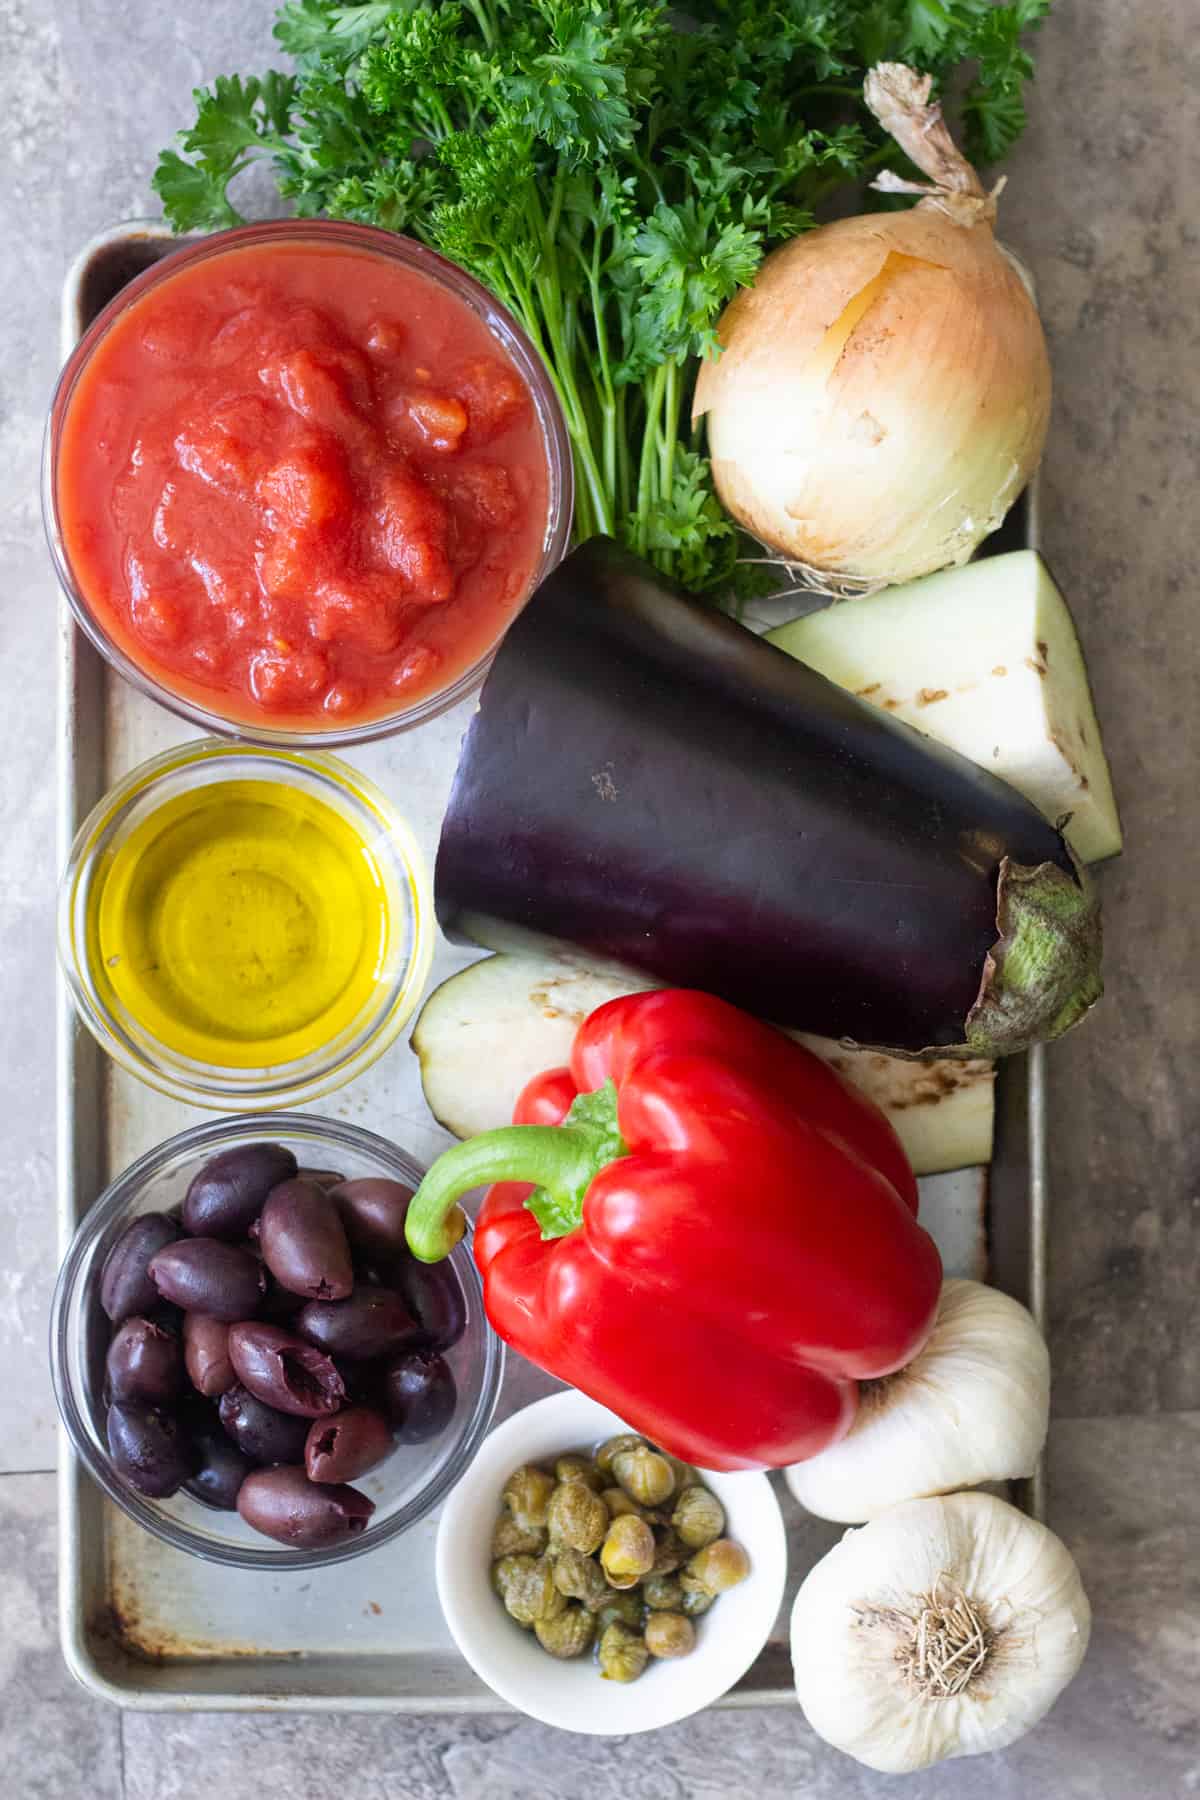 To make this easy eggplant dish, you need the following ingredients: Eggplants Onions Garlic Tomatoes Red bell pepper Olives Capers